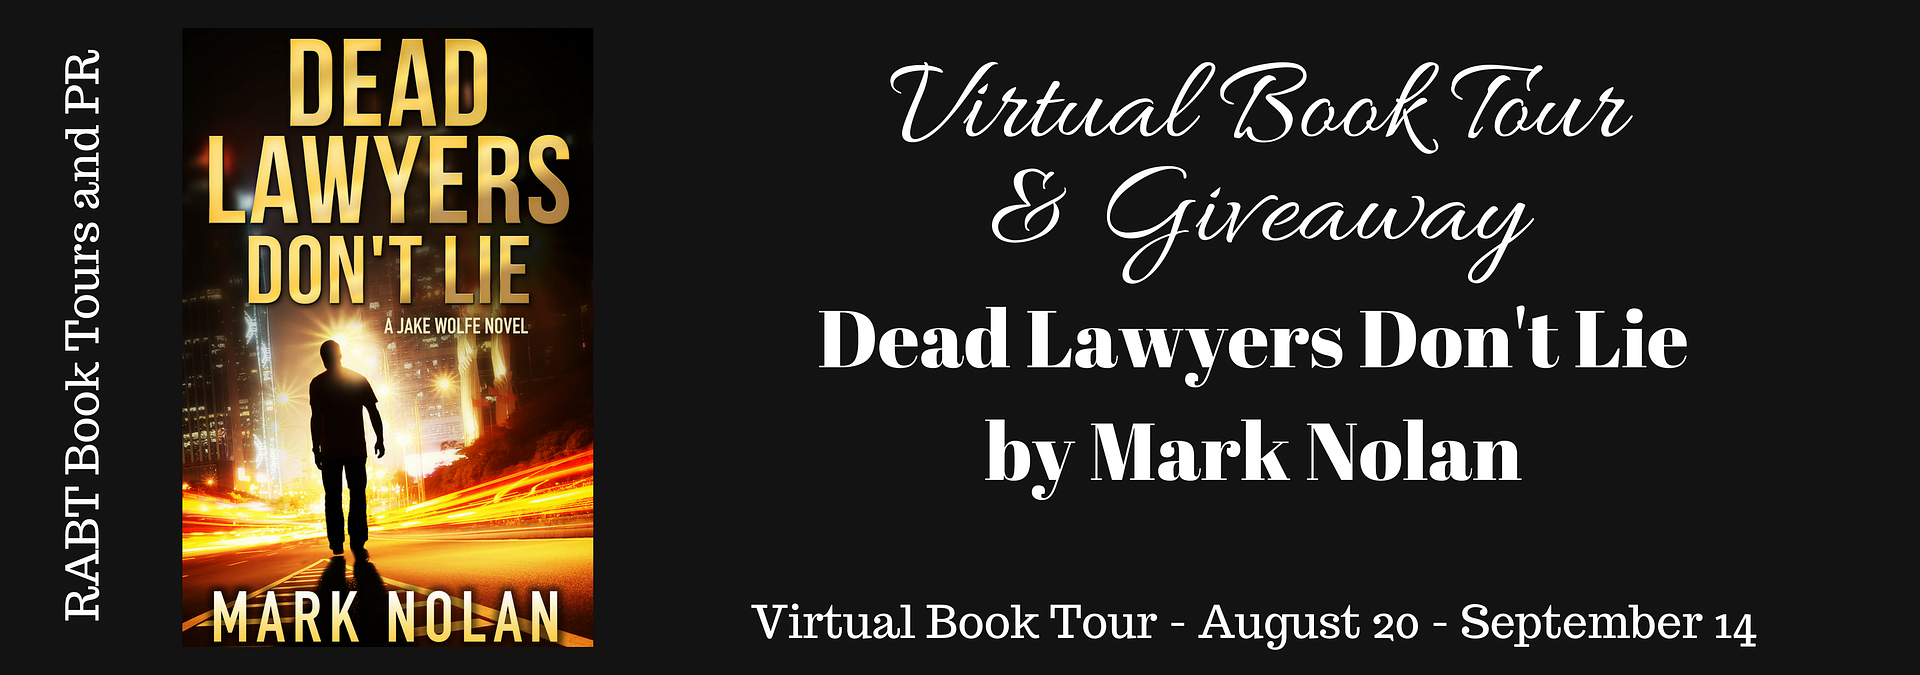 Virtual Book Tour: Dead Lawyers Don't Lie by @marknolan #giveaway #thriller